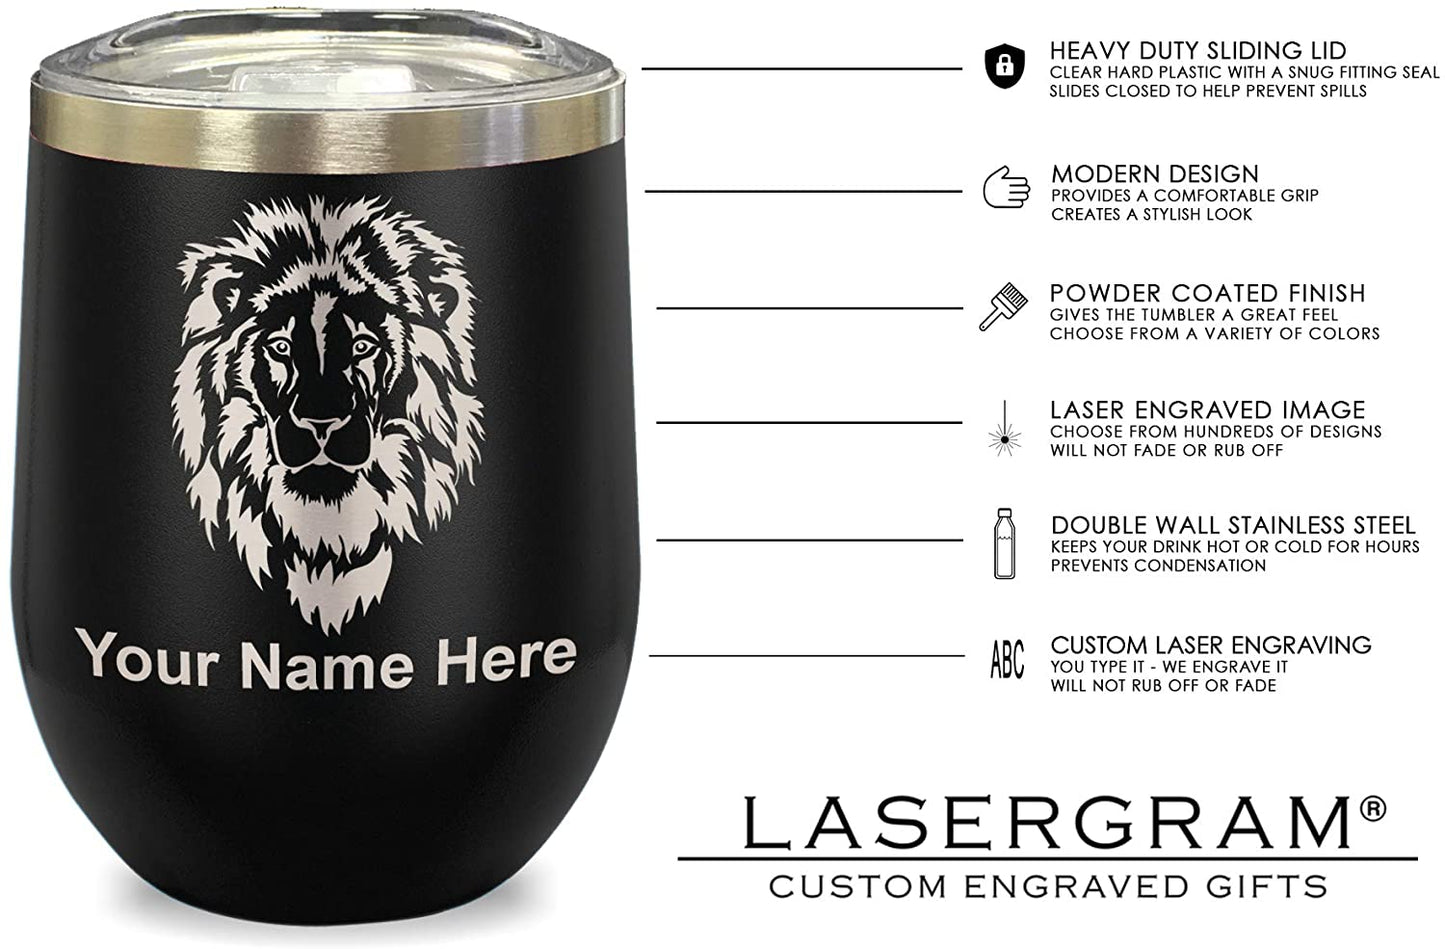 LaserGram Double Wall Stainless Steel Wine Glass, World's Greatest Wife, Personalized Engraving Included